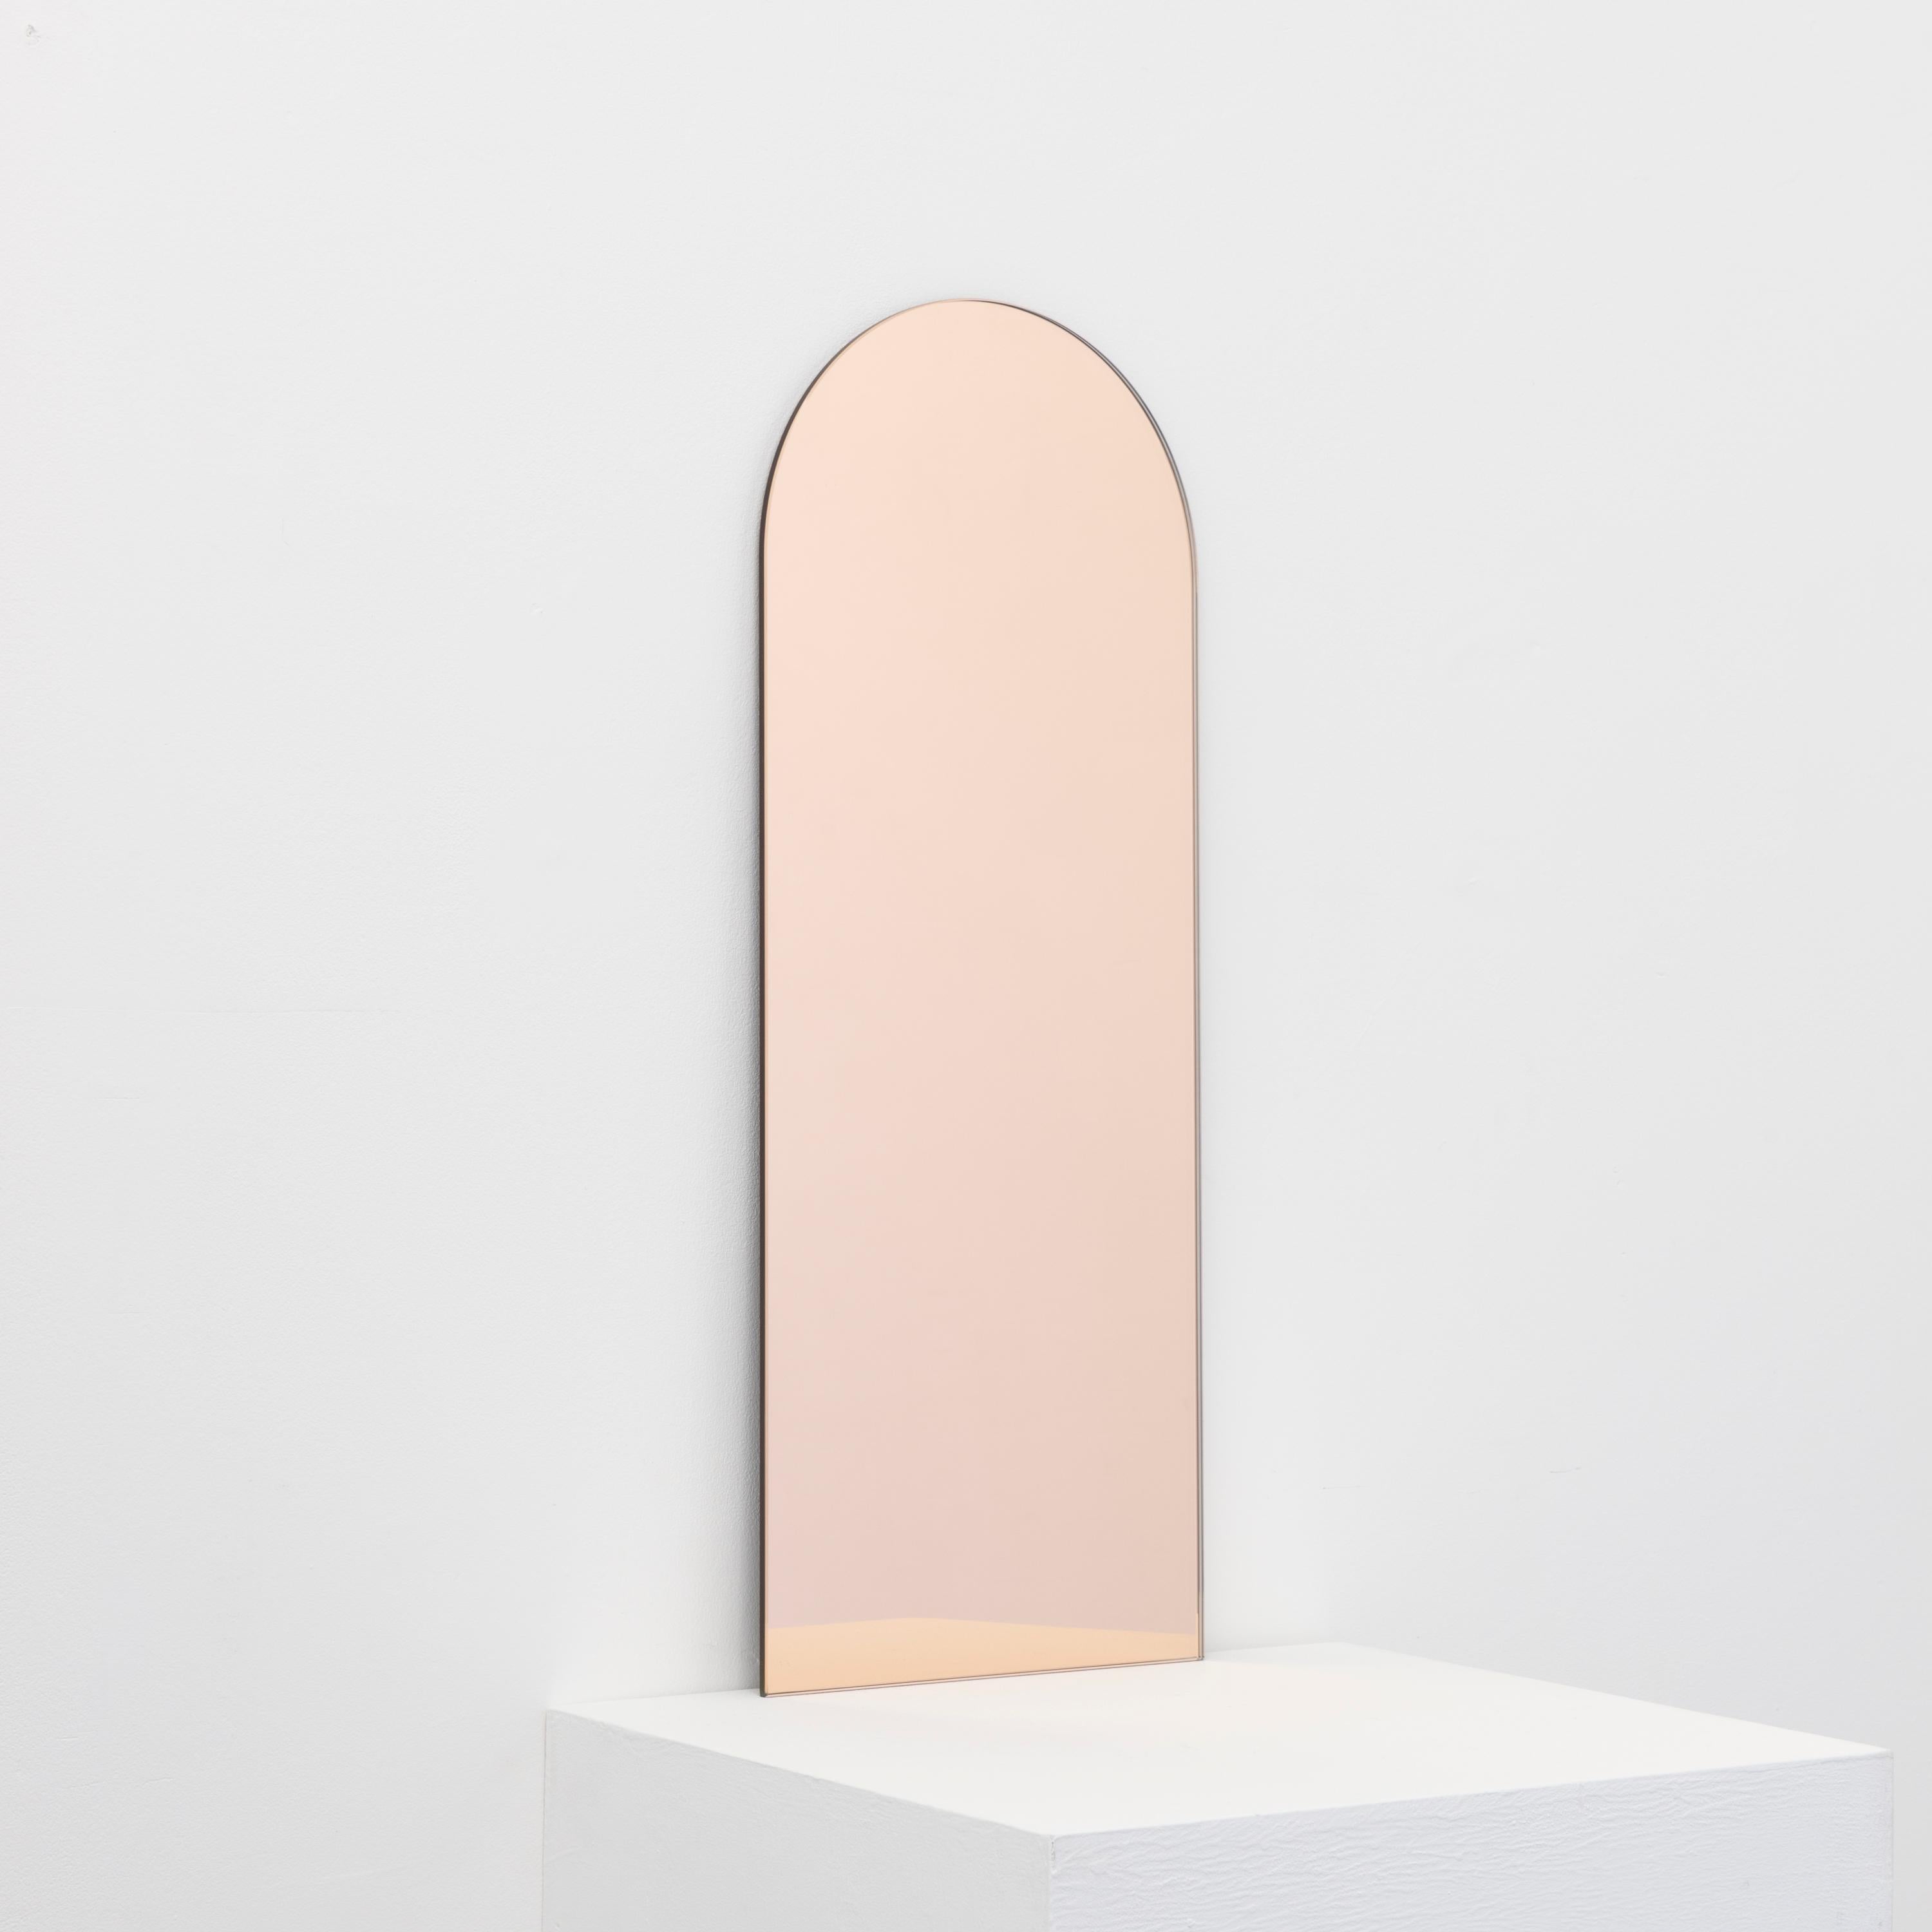 Minimalist rectangular shaped frameless rose gold mirror with a floating effect. Designed and made in London, UK.

Our mirrors are designed with an integrated French cleat (split batten) system that ensures the mirror is securely mounted flush with